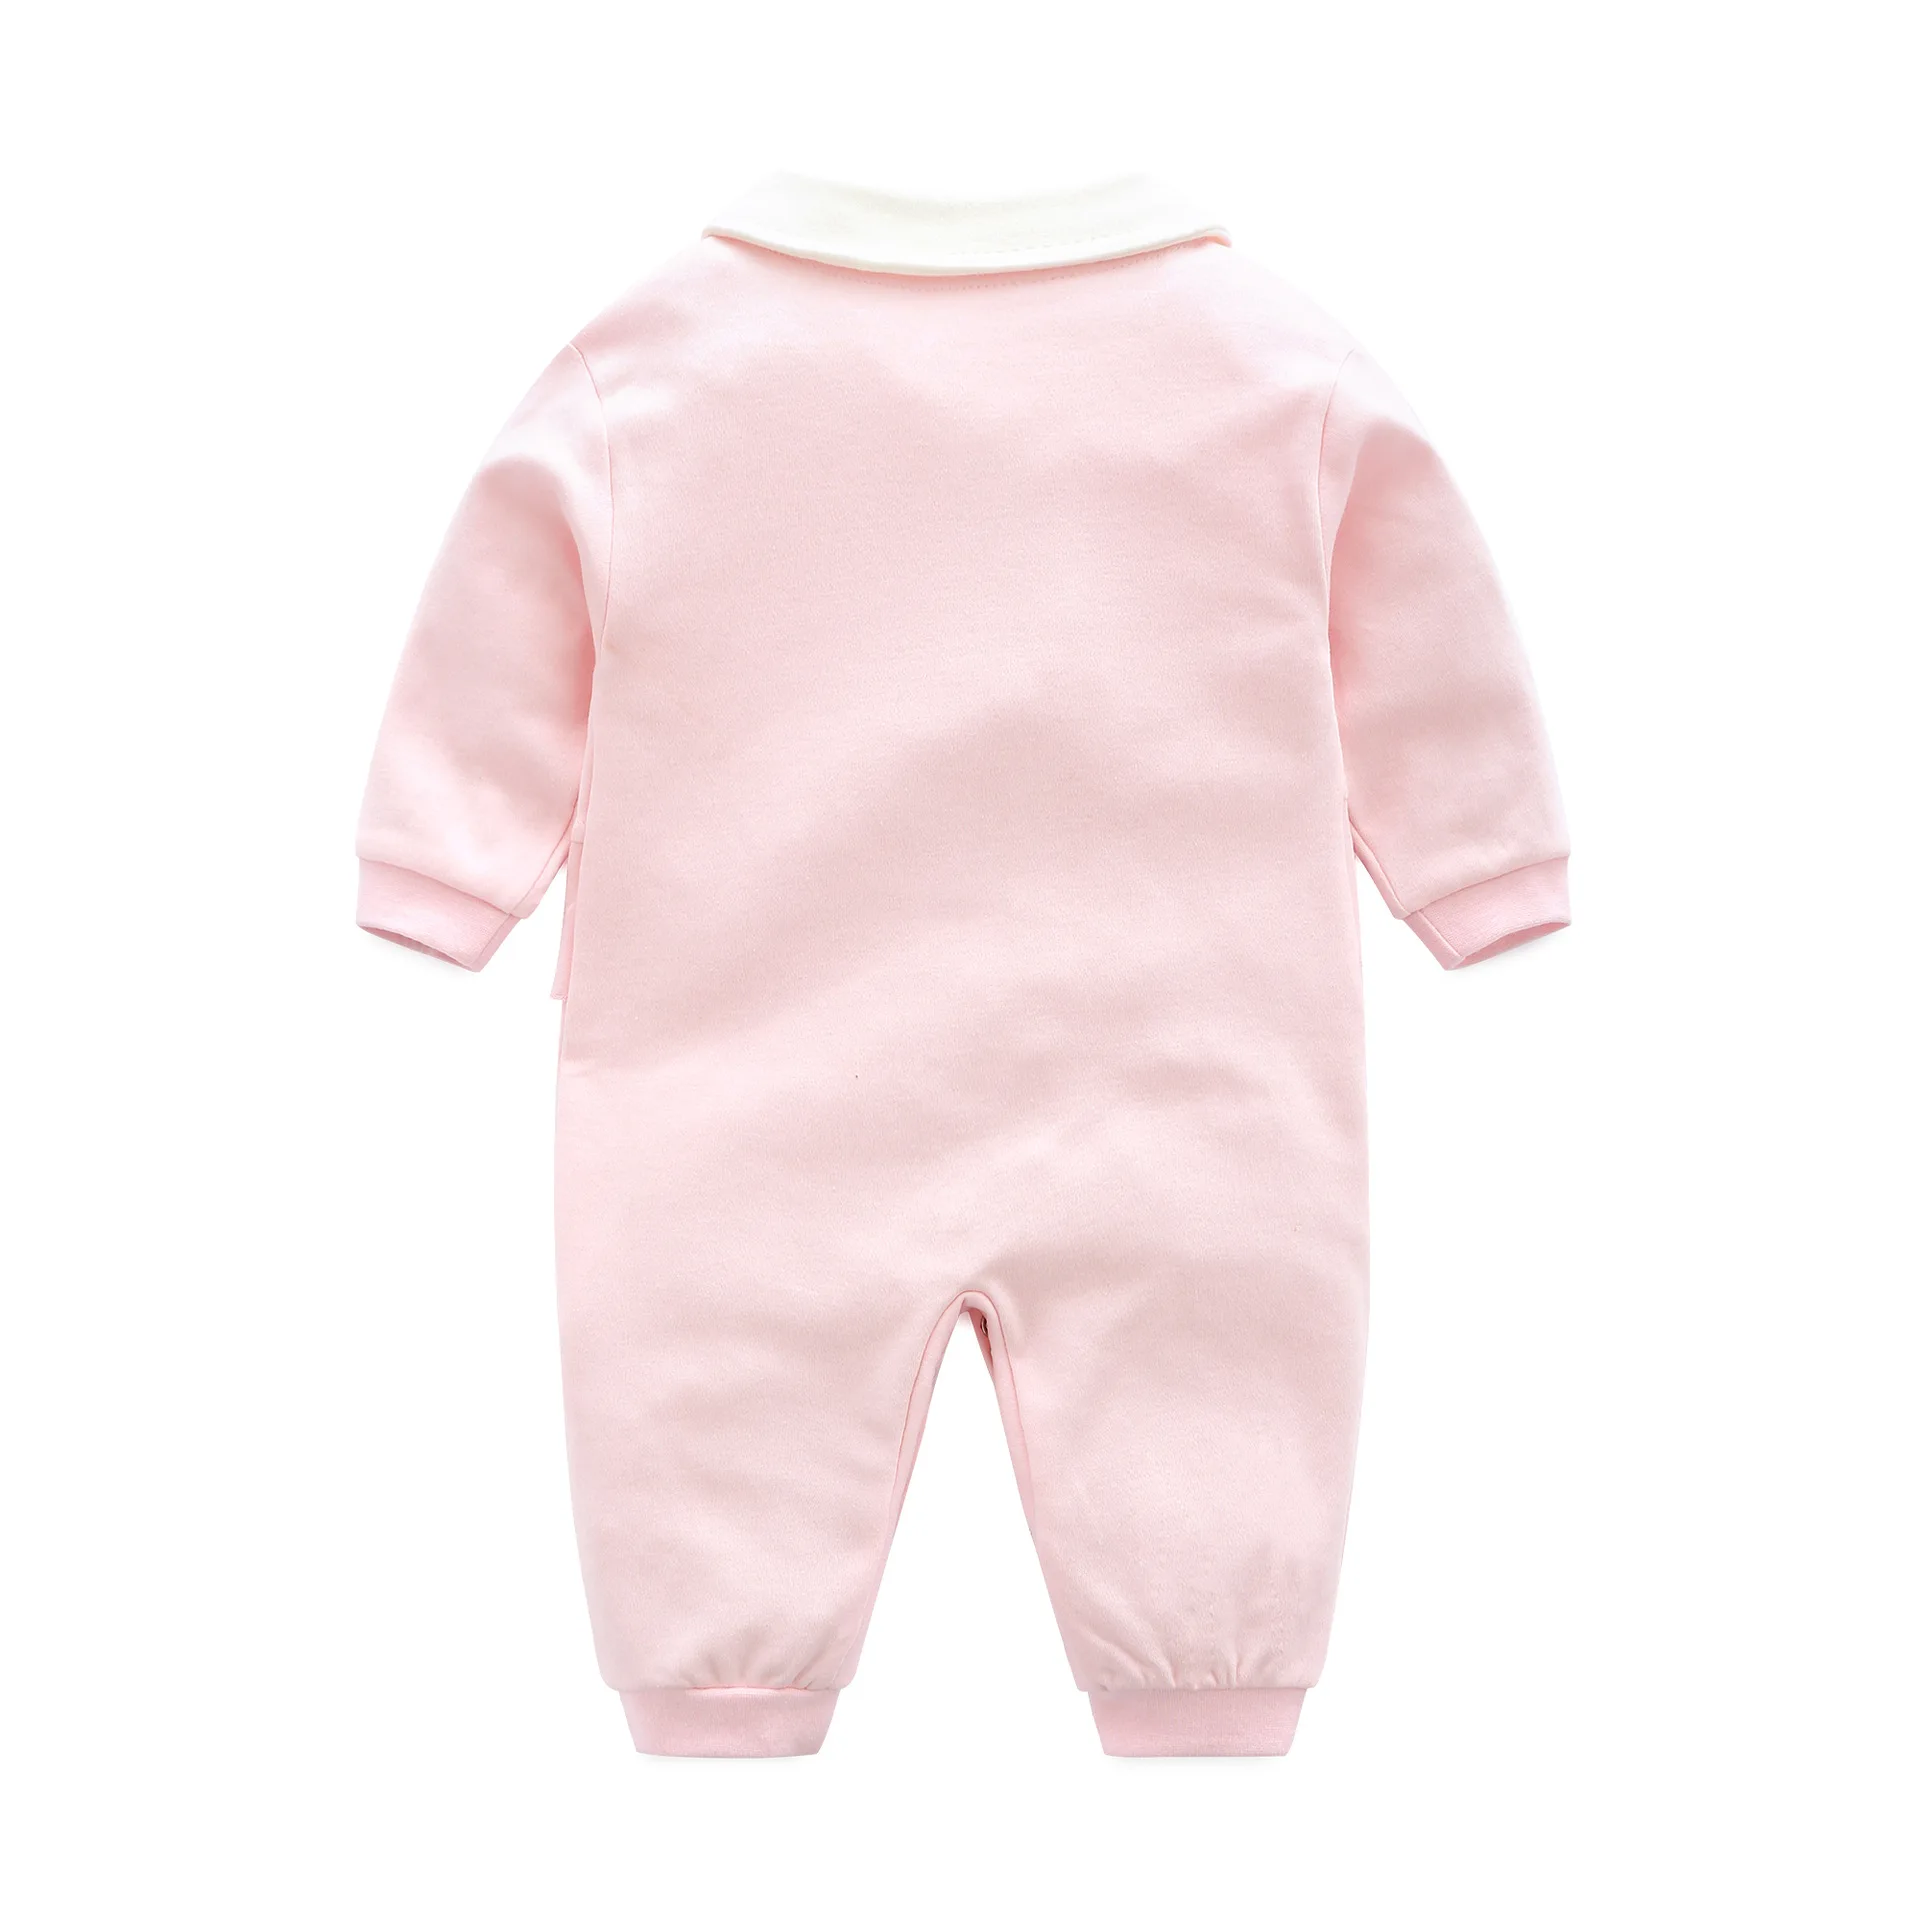 Baby Clothes Jumpsuits Long Sleeves Rompers Outfits